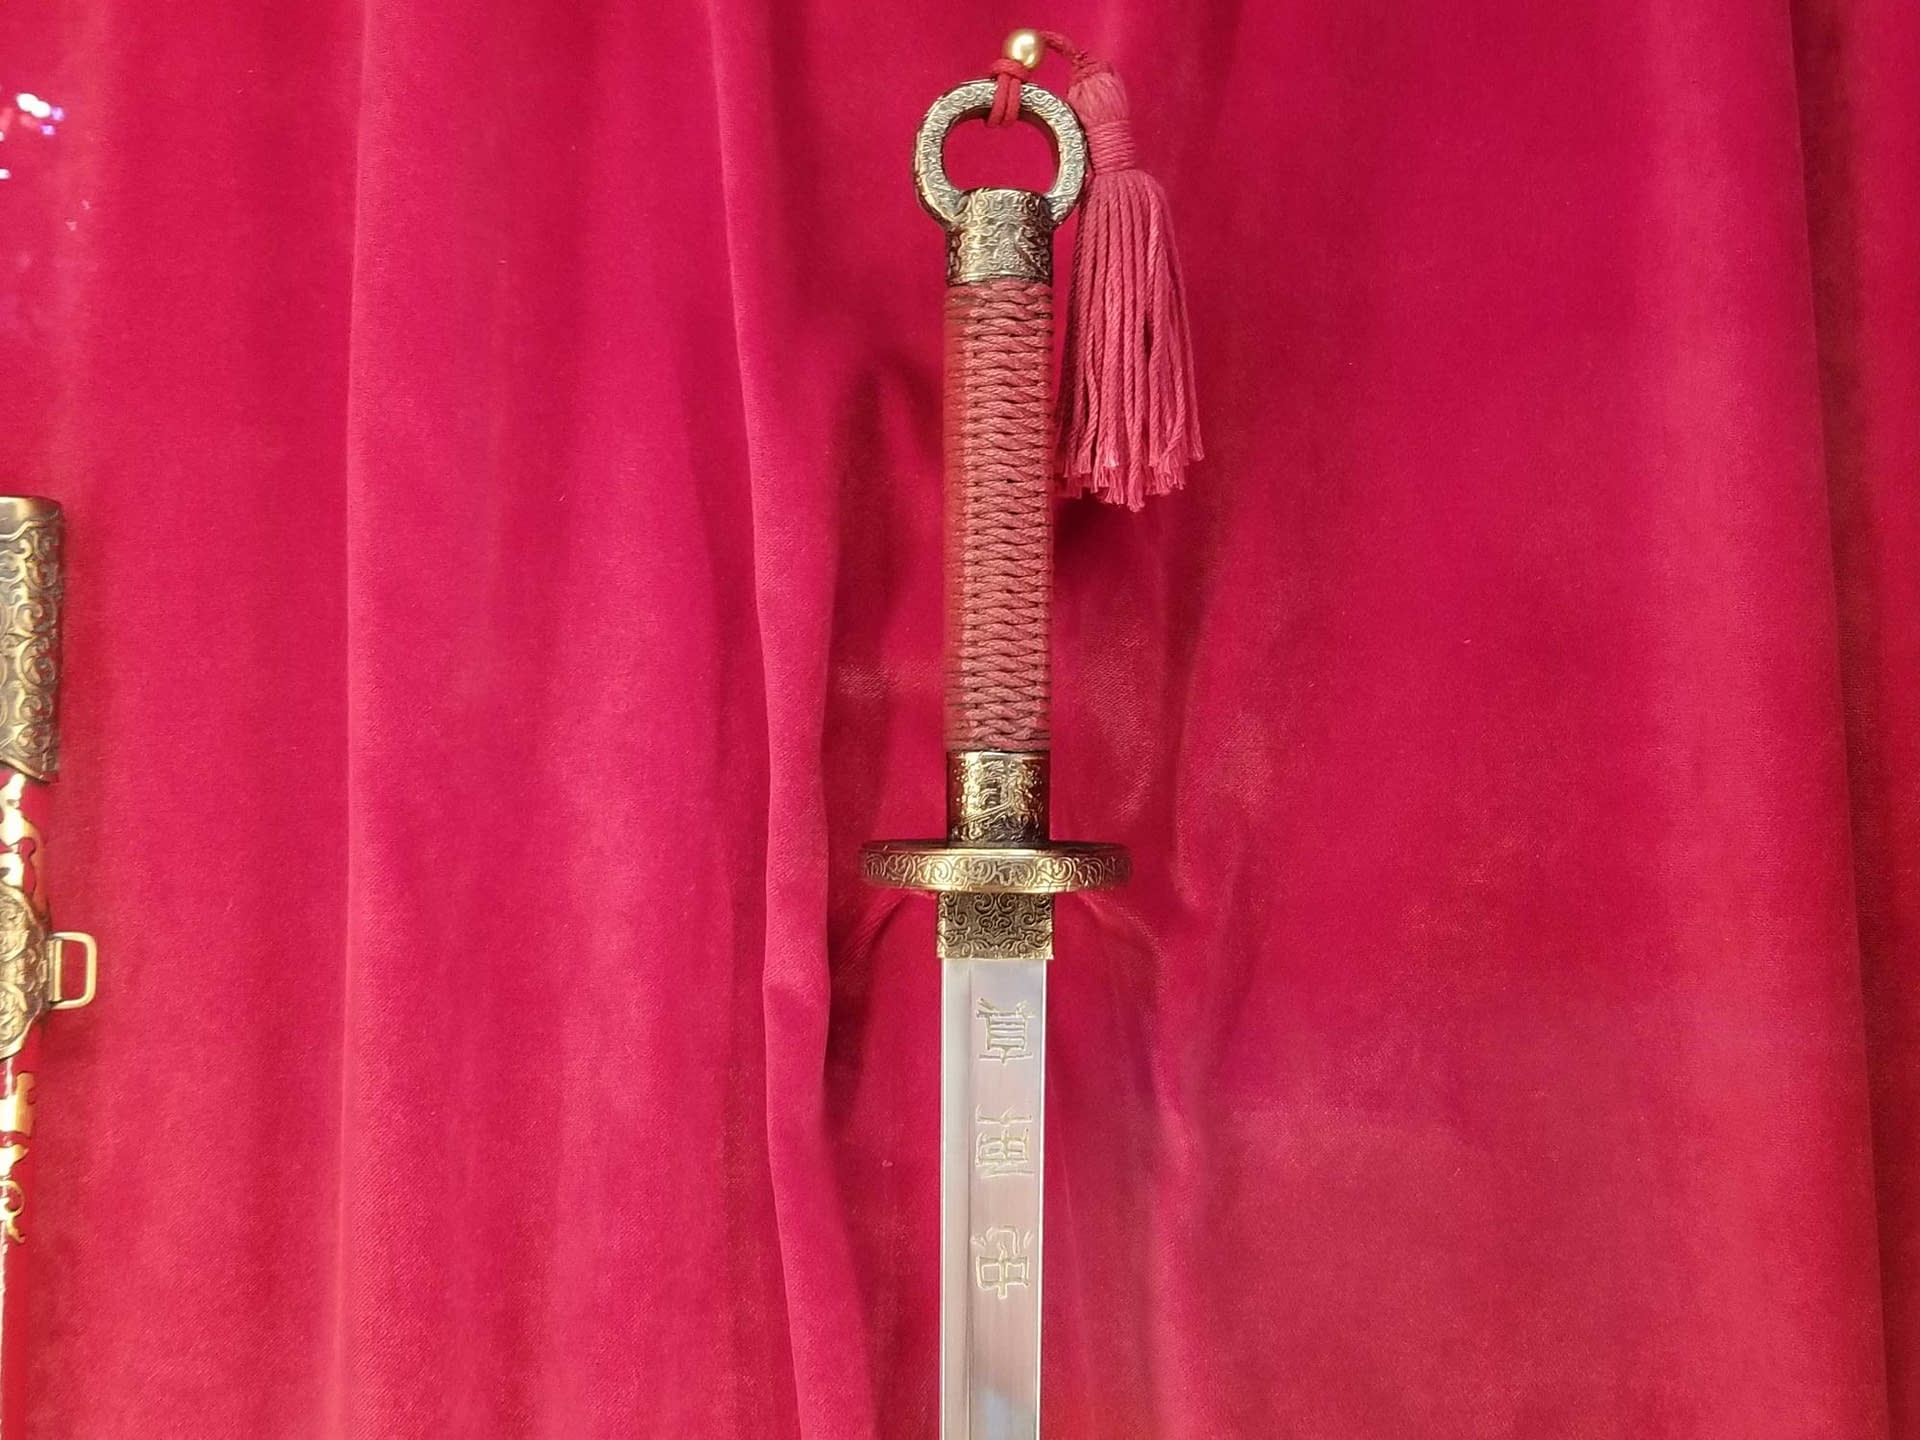 The Sword from "Mulan" is on Display at SDCC